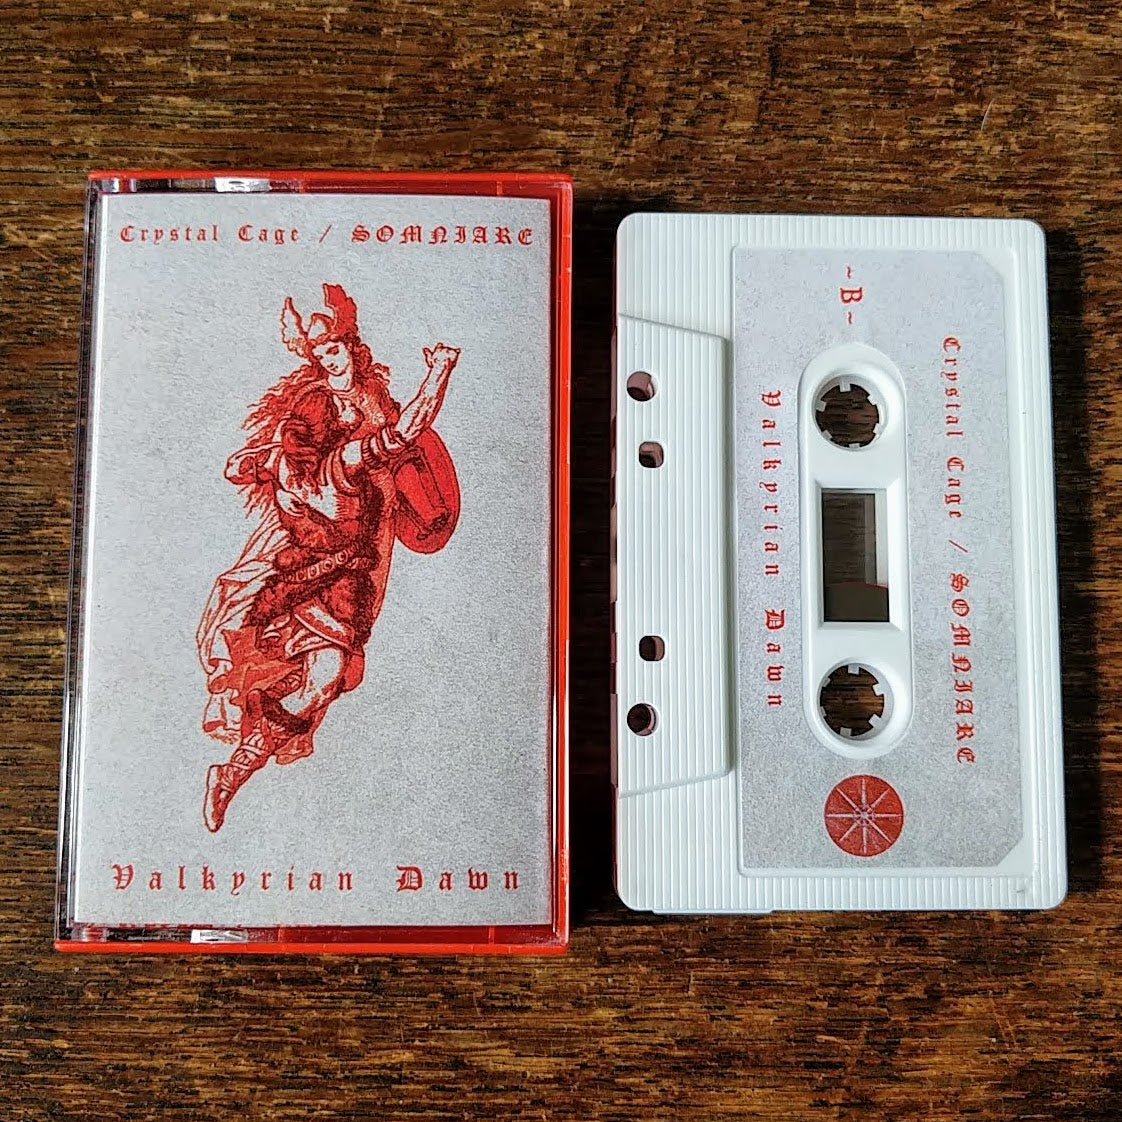 [SOLD OUT] CRYSTAL CAGE / SOMNIARE "Valkyrian Dawn" Cassette Tape